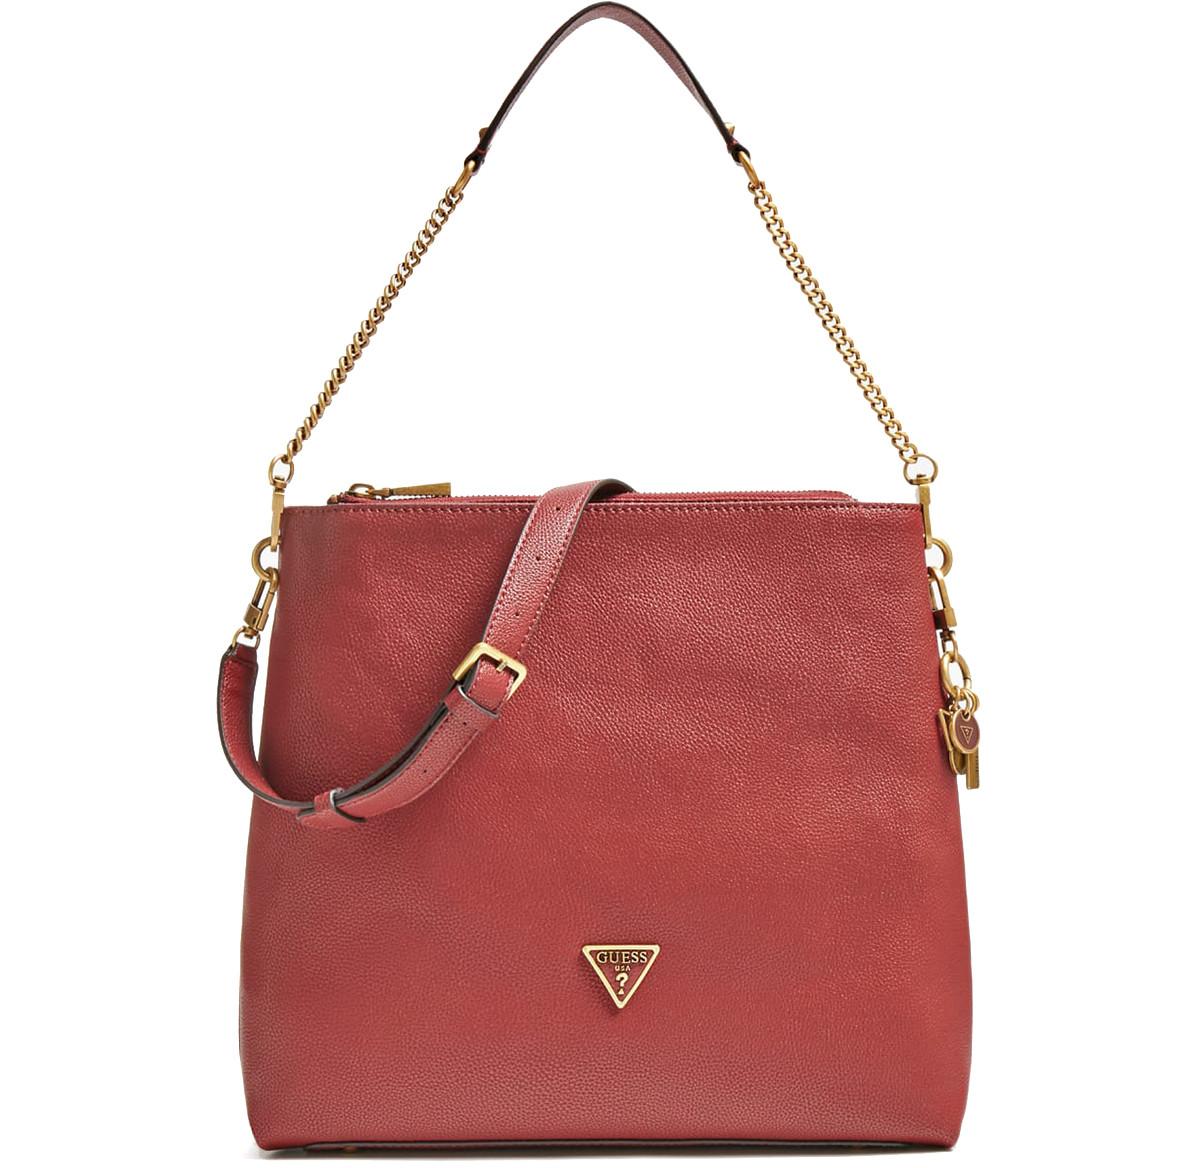 Guess Red Destiny Shoulder Bag w/Chain Strap at FORZIERI